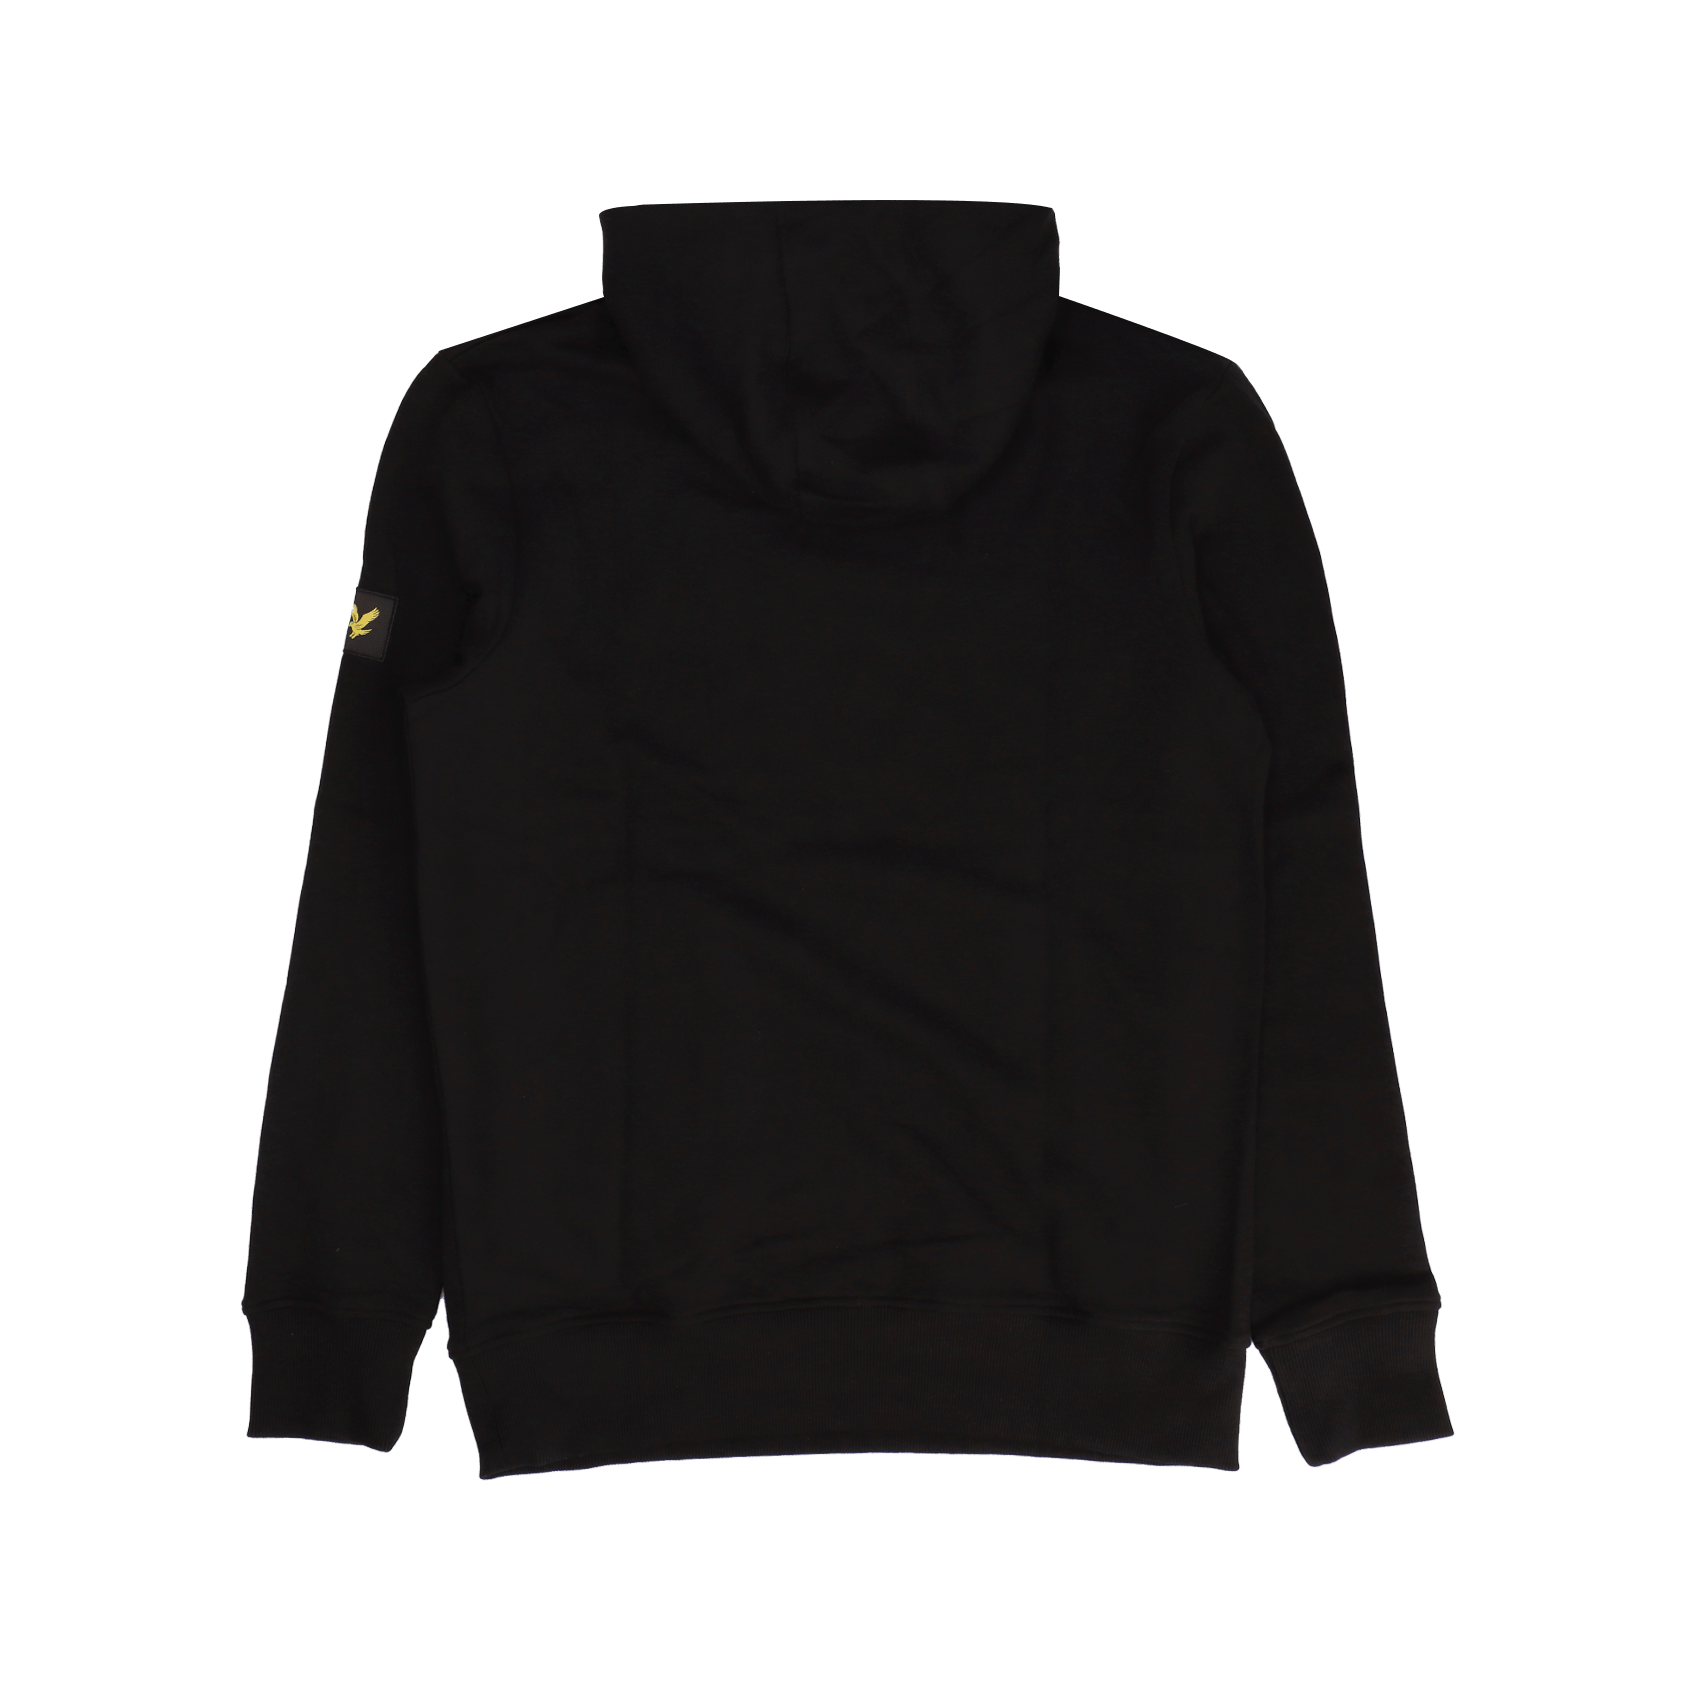 Face Covered Hoodie - Jet Black.